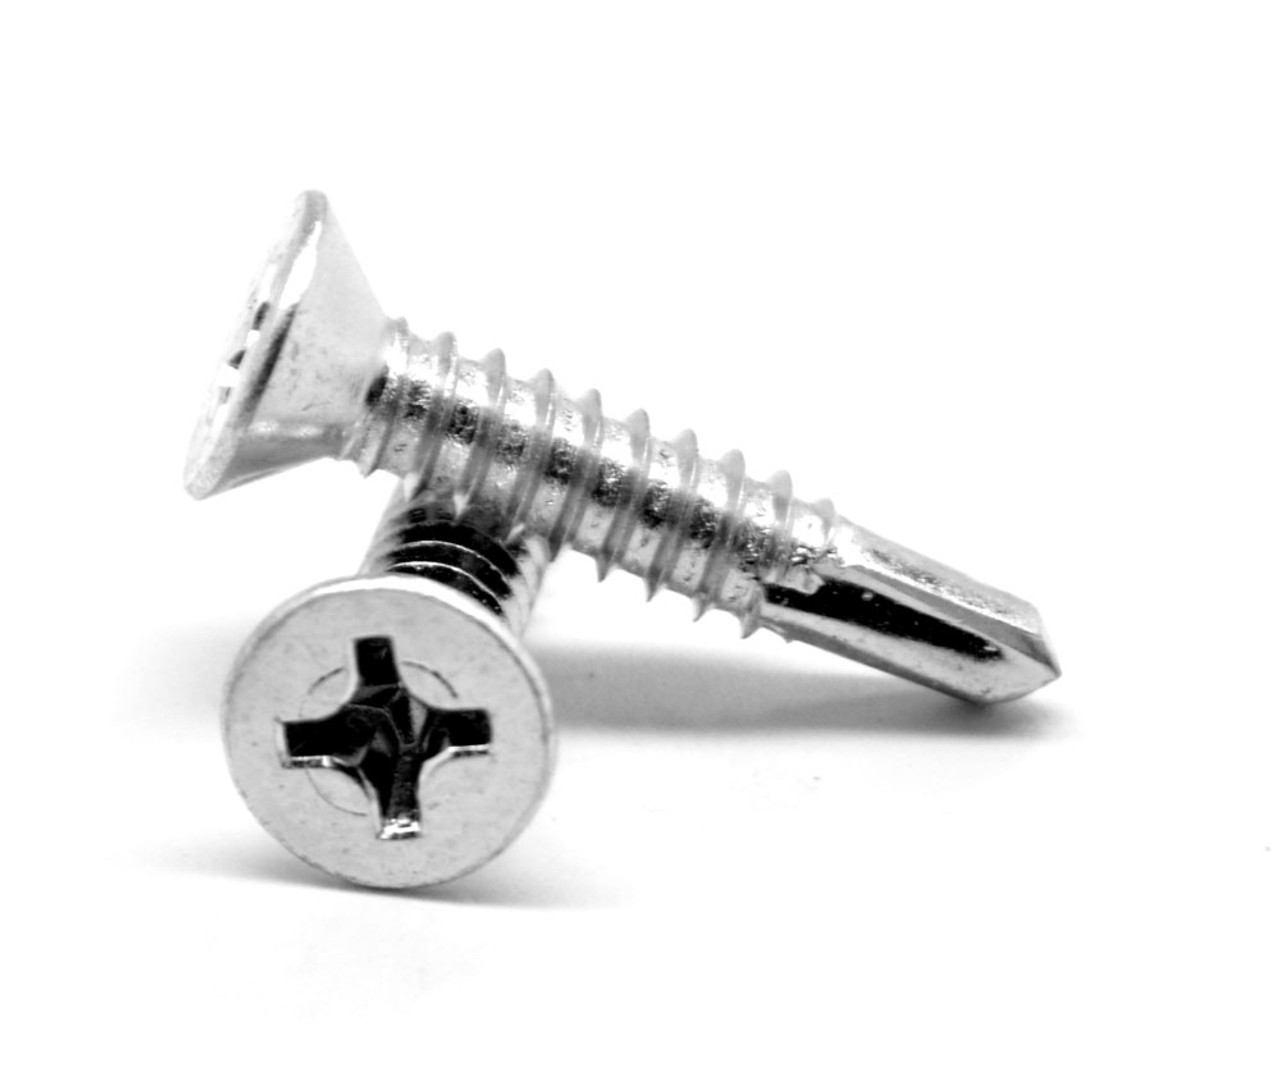 1/4-14 x 4 1/2 Self Drilling Screw Phillips Flat Head #3 Point Stainless Steel 18-8